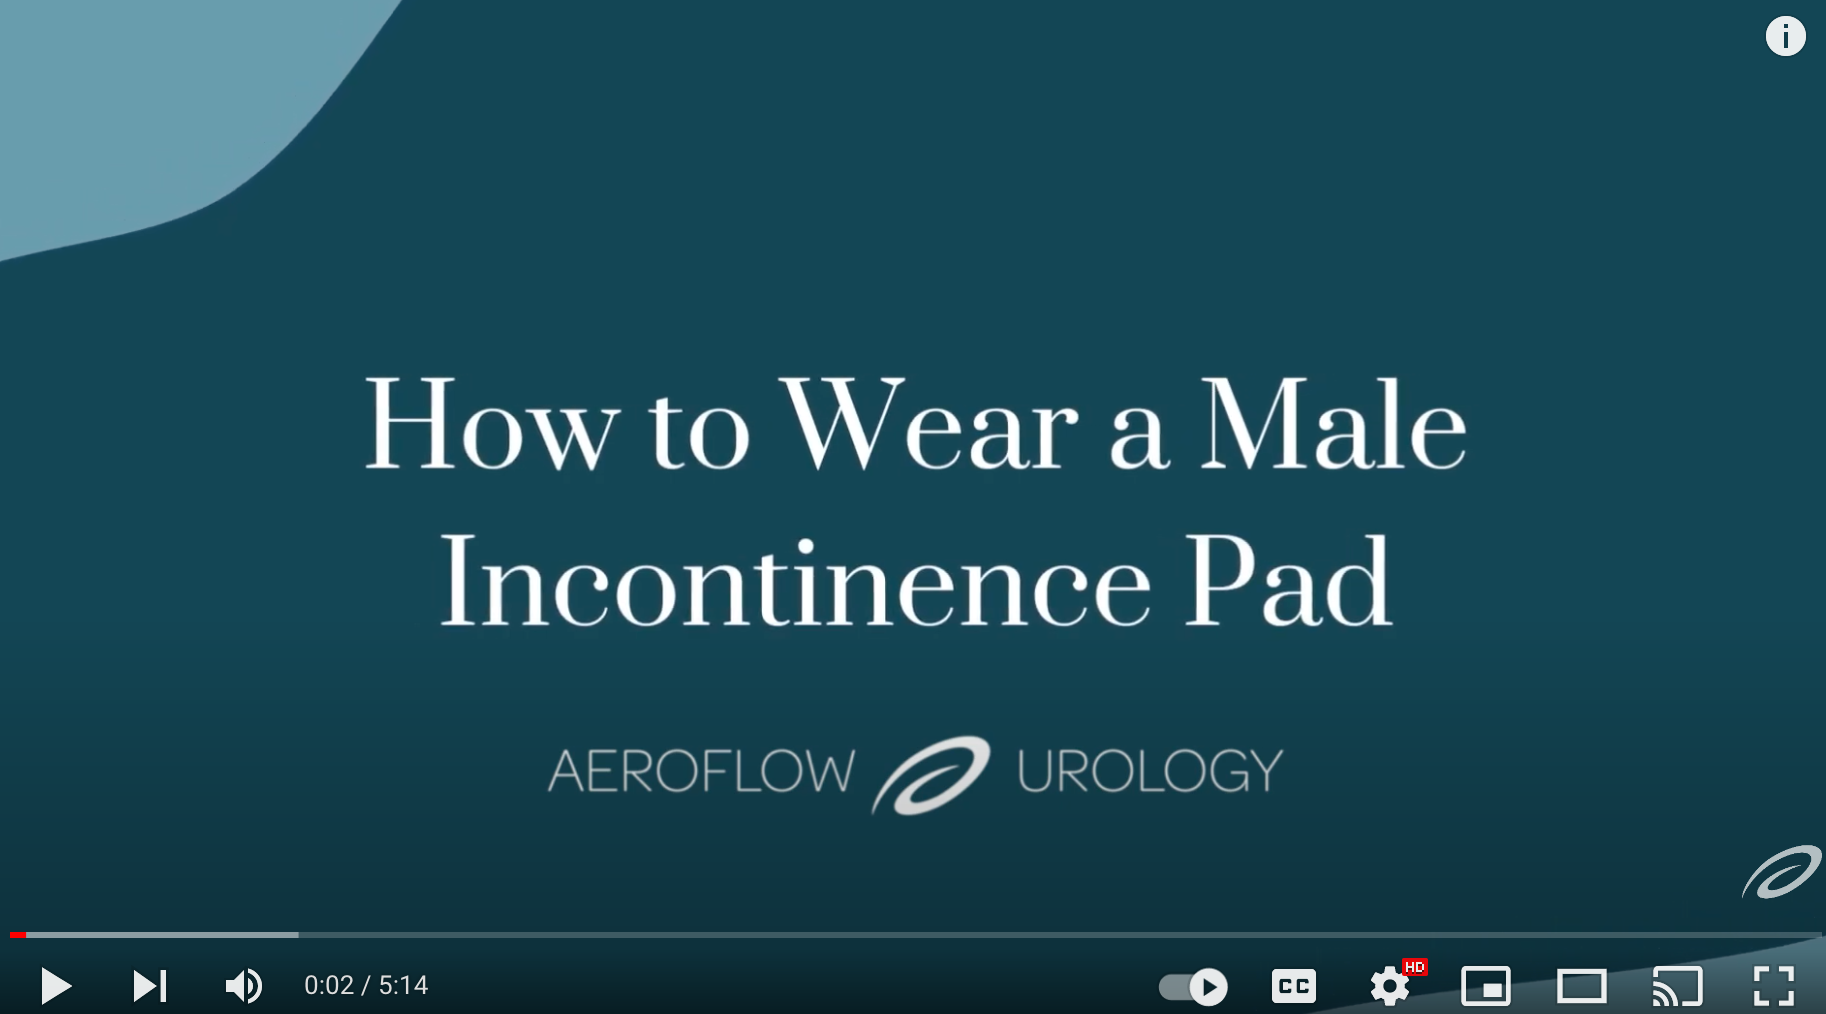 Booster Pads Tips & Uses for Adults With Incontinence